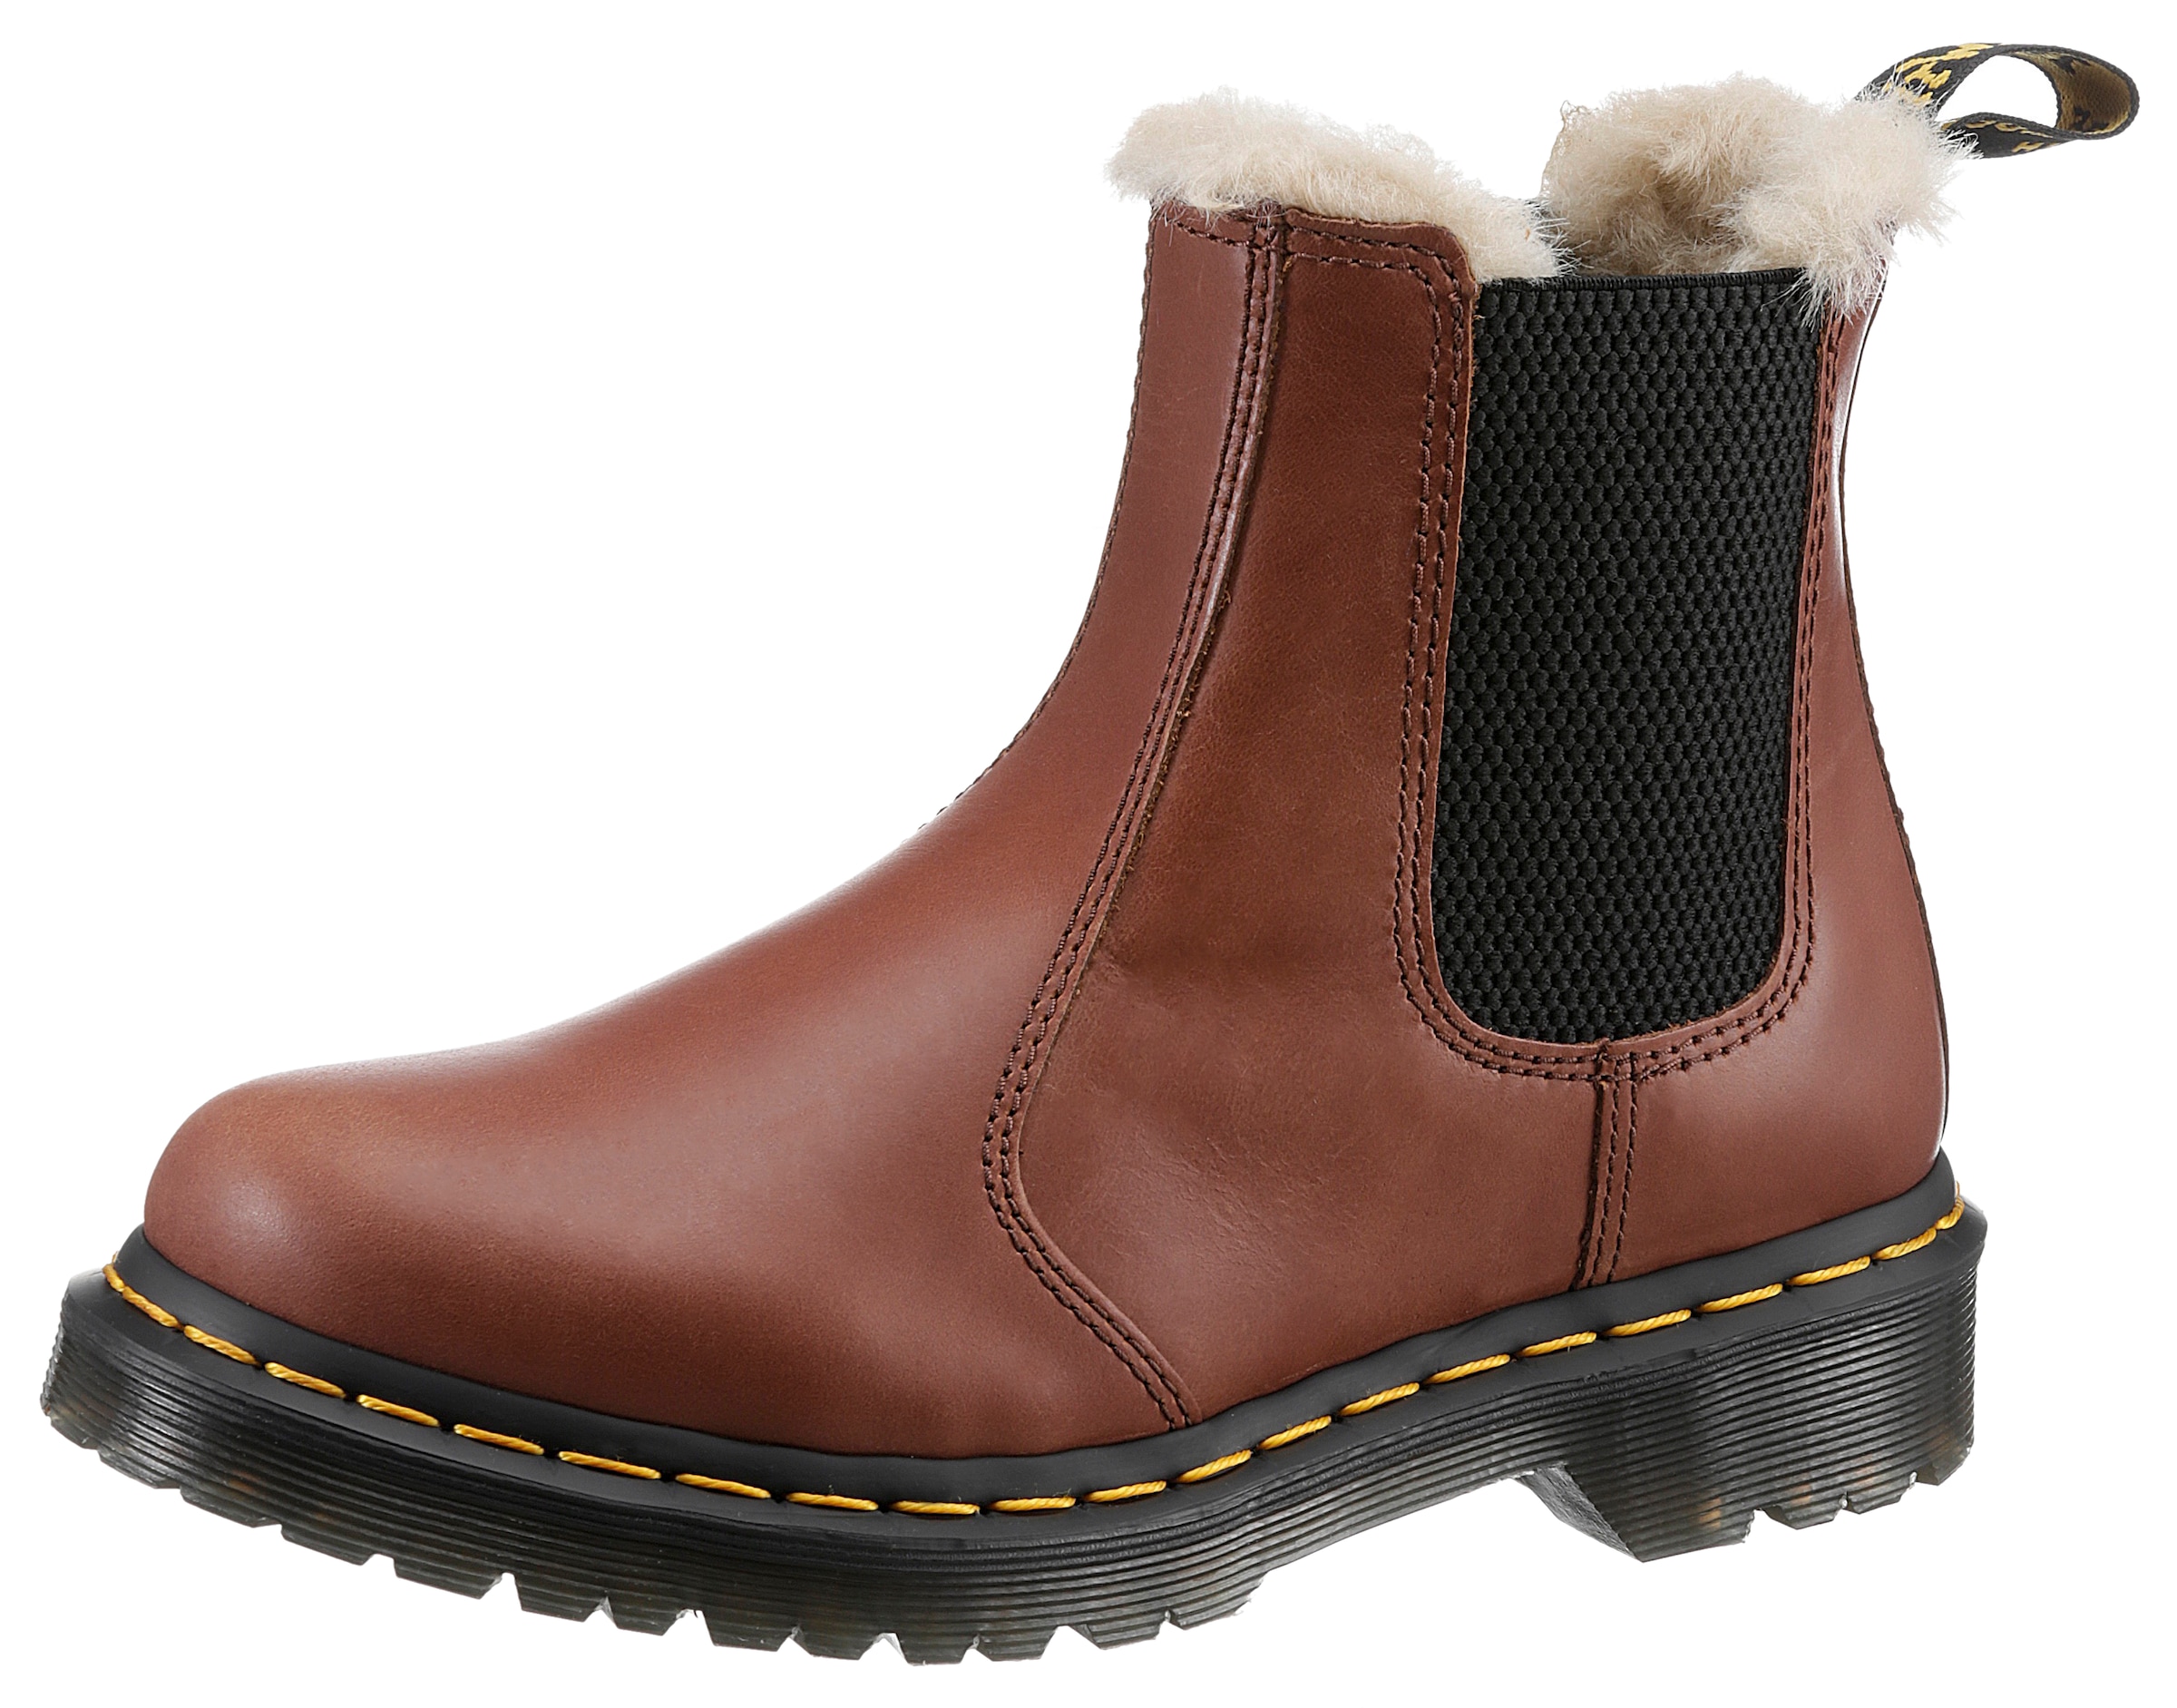 DR. MARTENS Chelseaboots "Leonore", Chunky Boots, Plateau Schuh, Boots mit Warmfutter